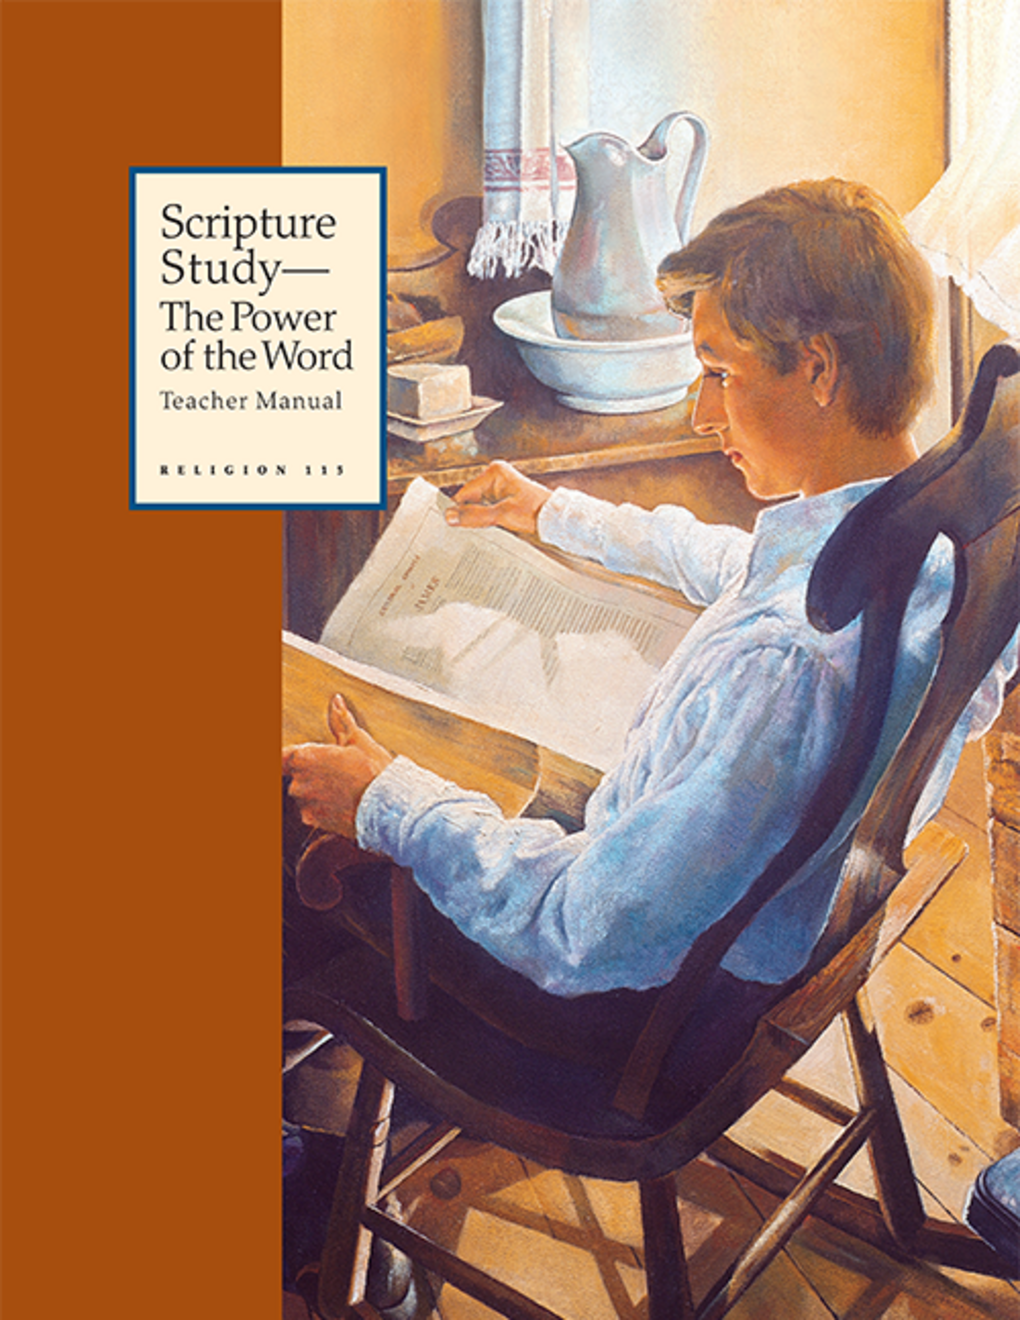 Scripture Study—The Power of the Word Teacher Manual (Rel 215)